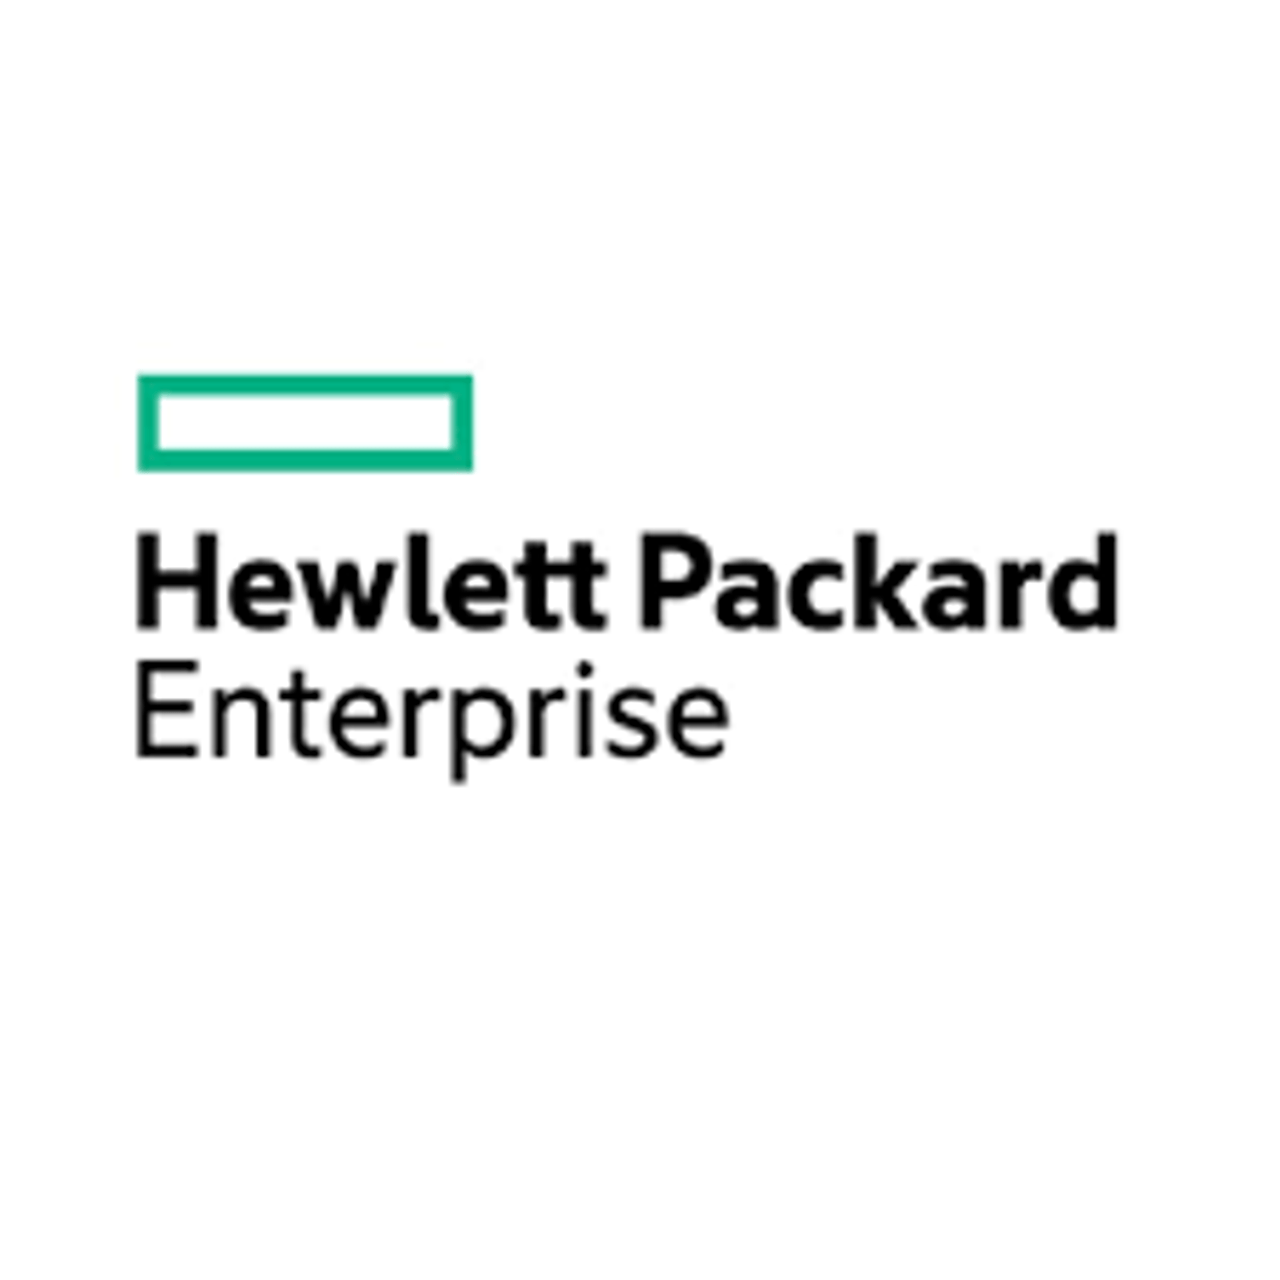 HPE D3600 Enclosure Factory integrated